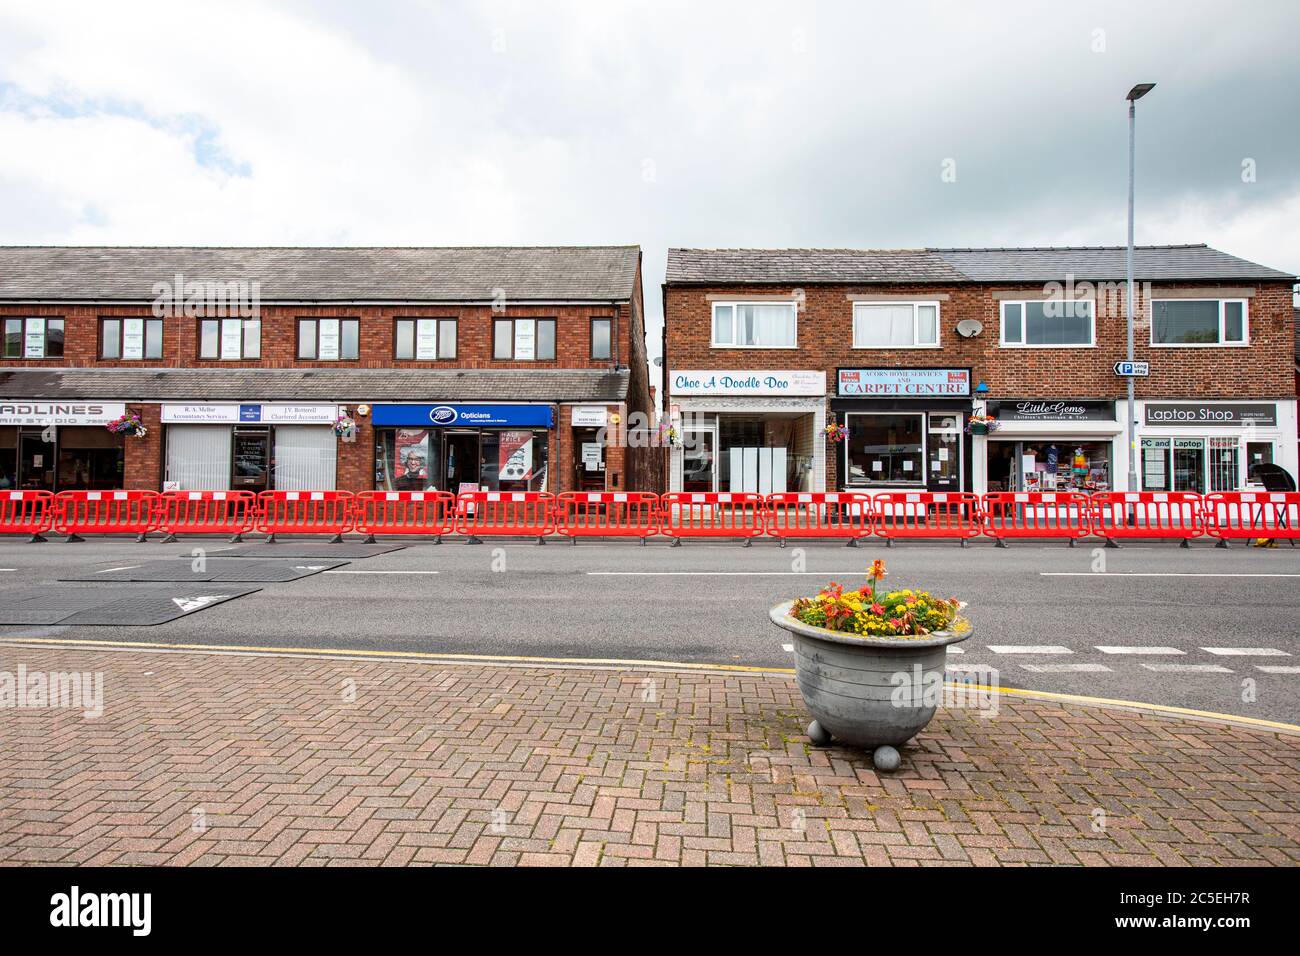 Blocked parking spaces for social distance, coronavirus COVID-19 in town centre of Sandbach Cheshire UK Stock Photo